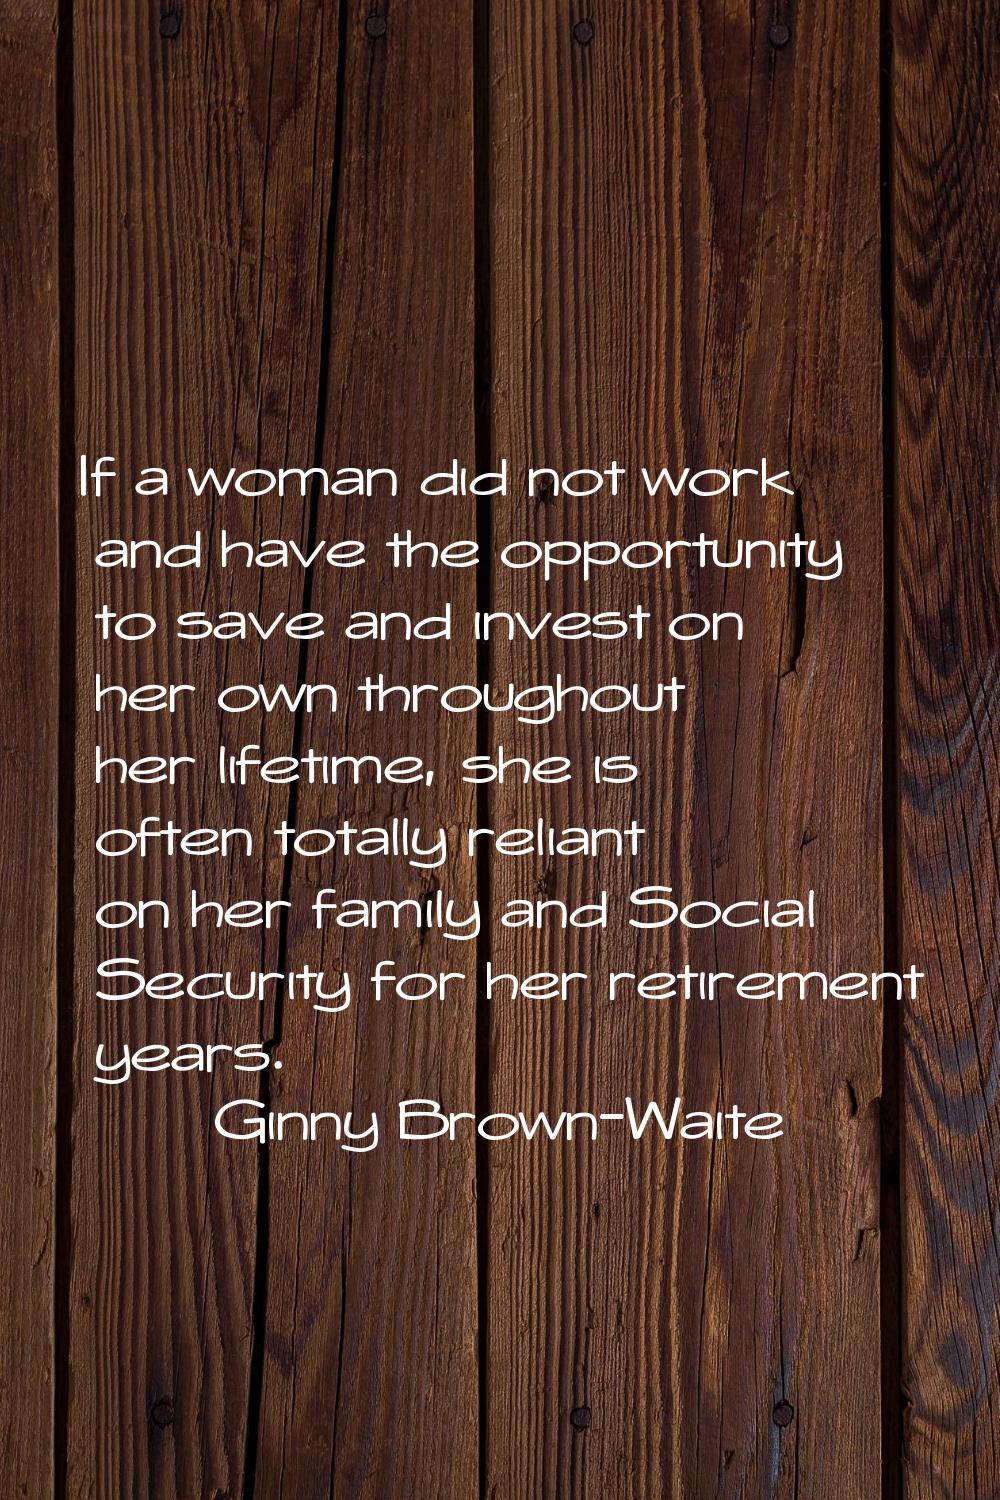 If a woman did not work and have the opportunity to save and invest on her own throughout her lifet